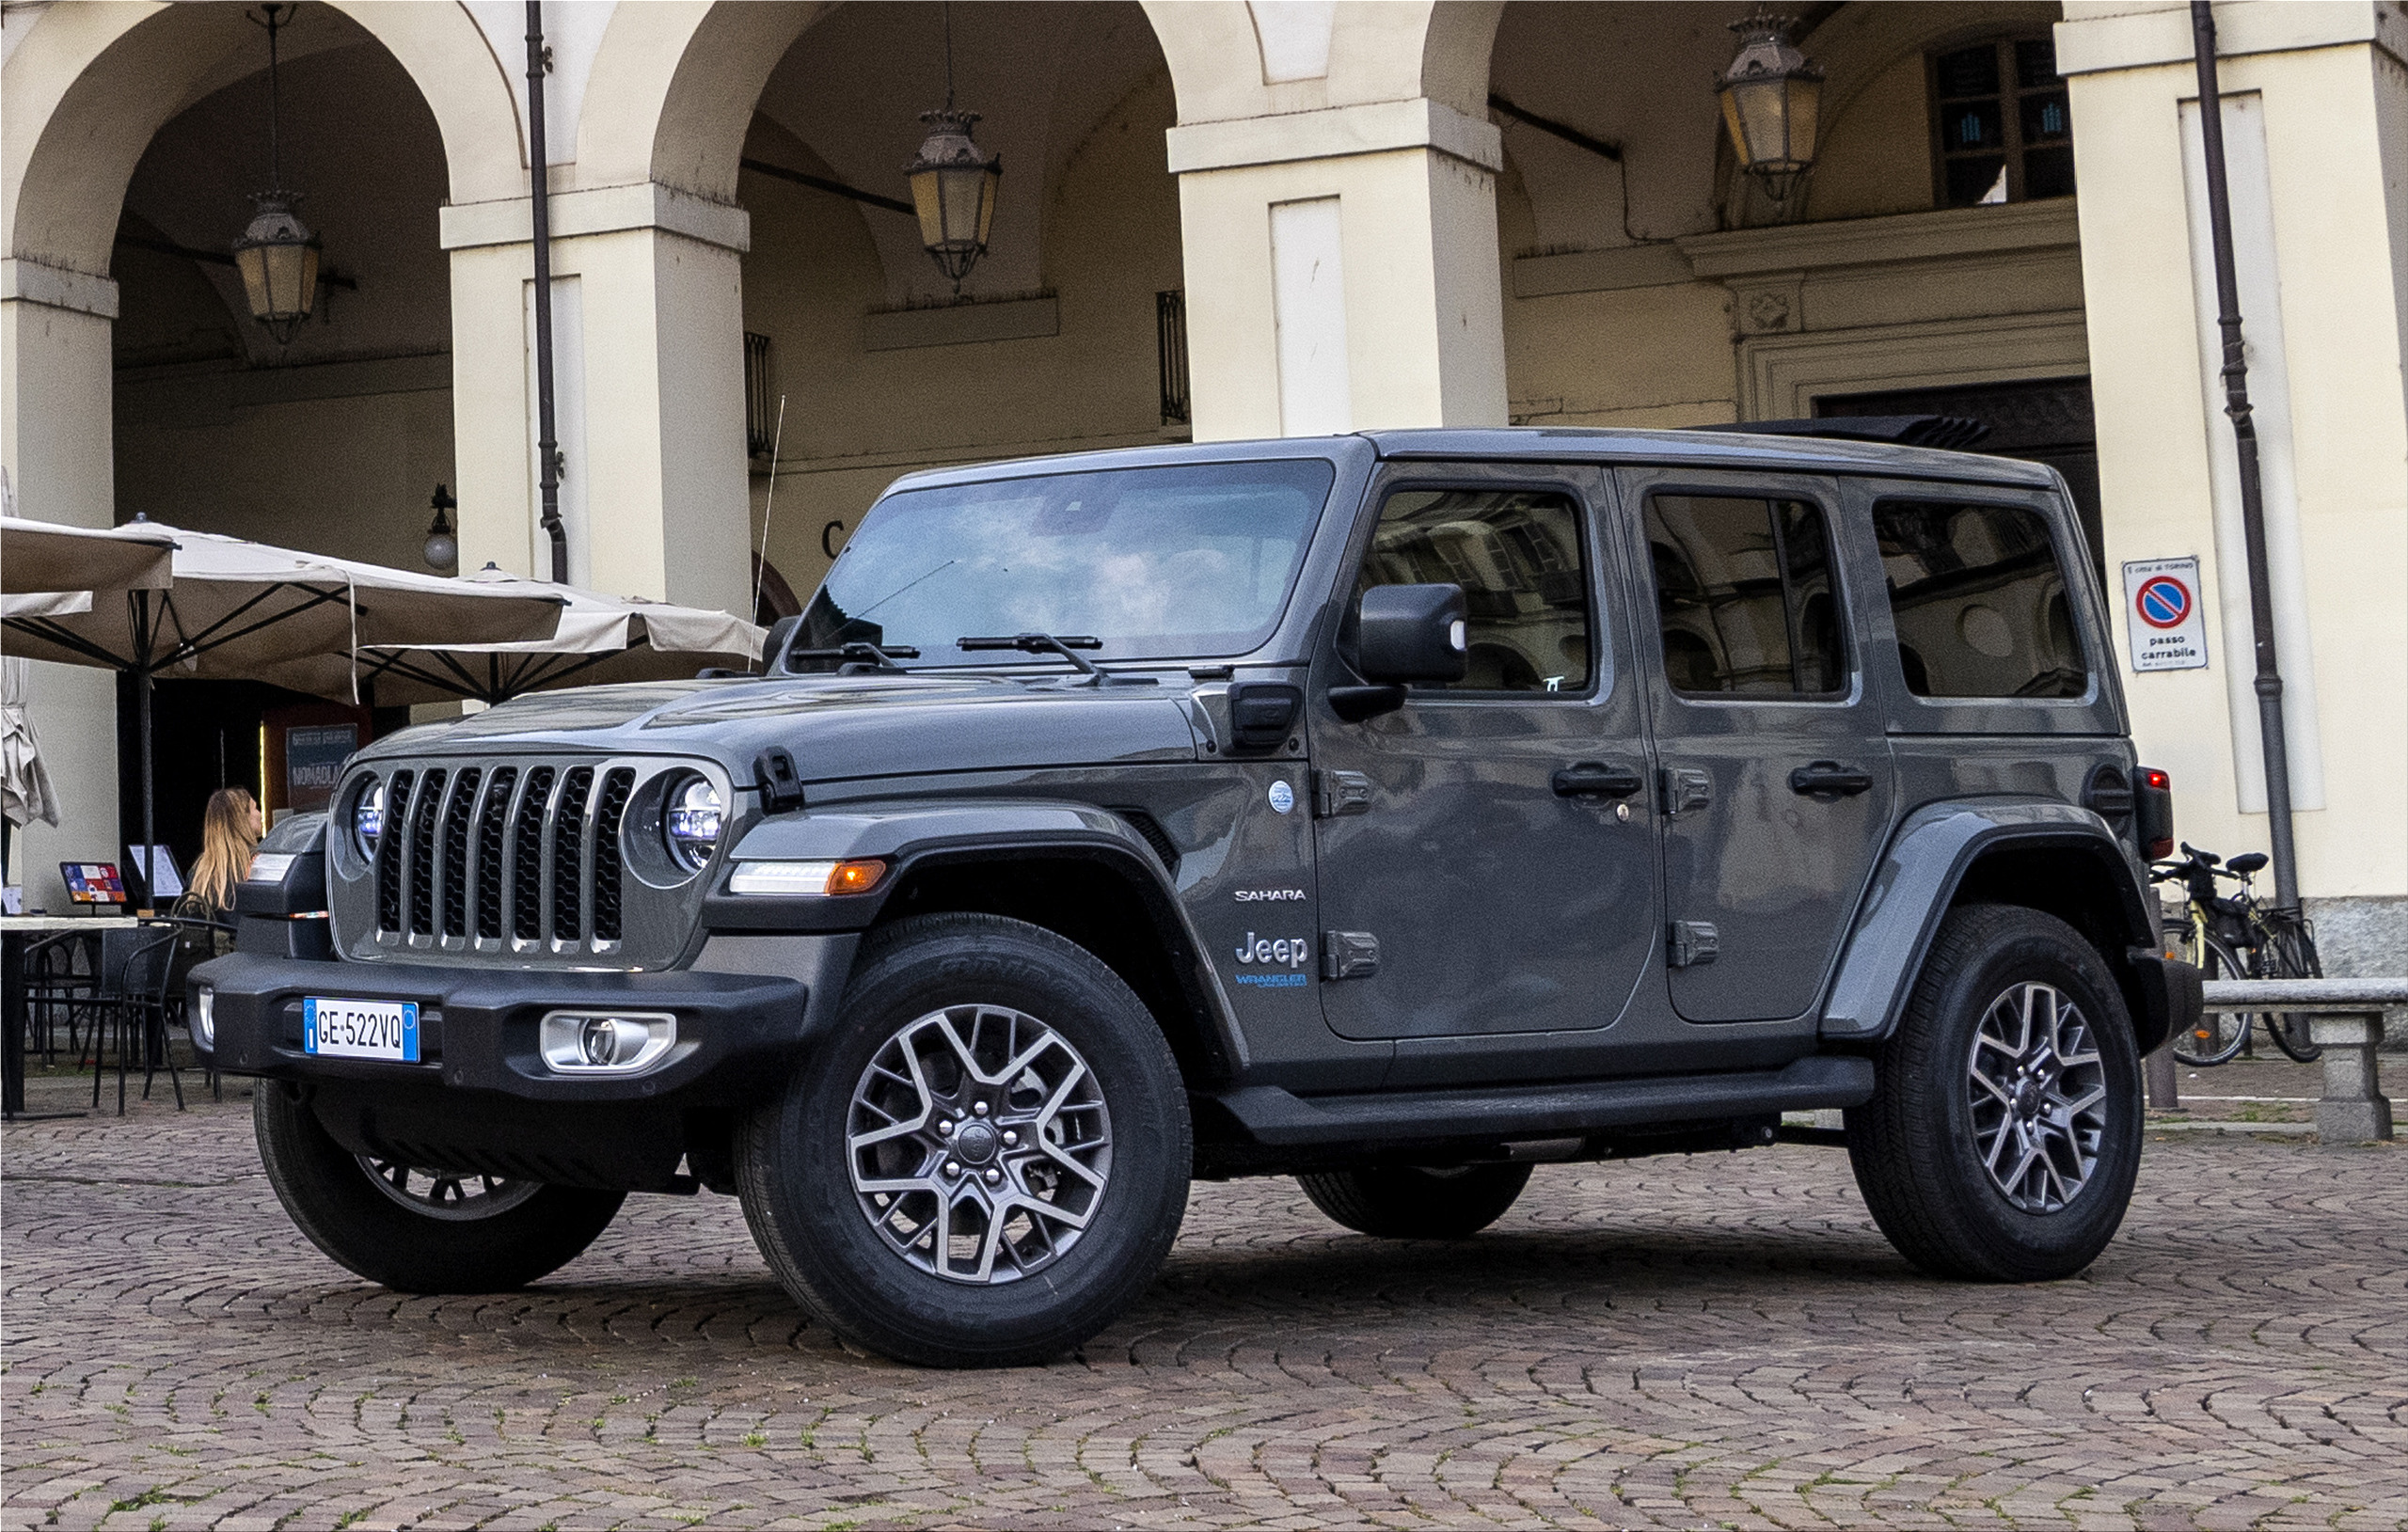 The Jeep Wrangler now comes in two new colors | Zateza